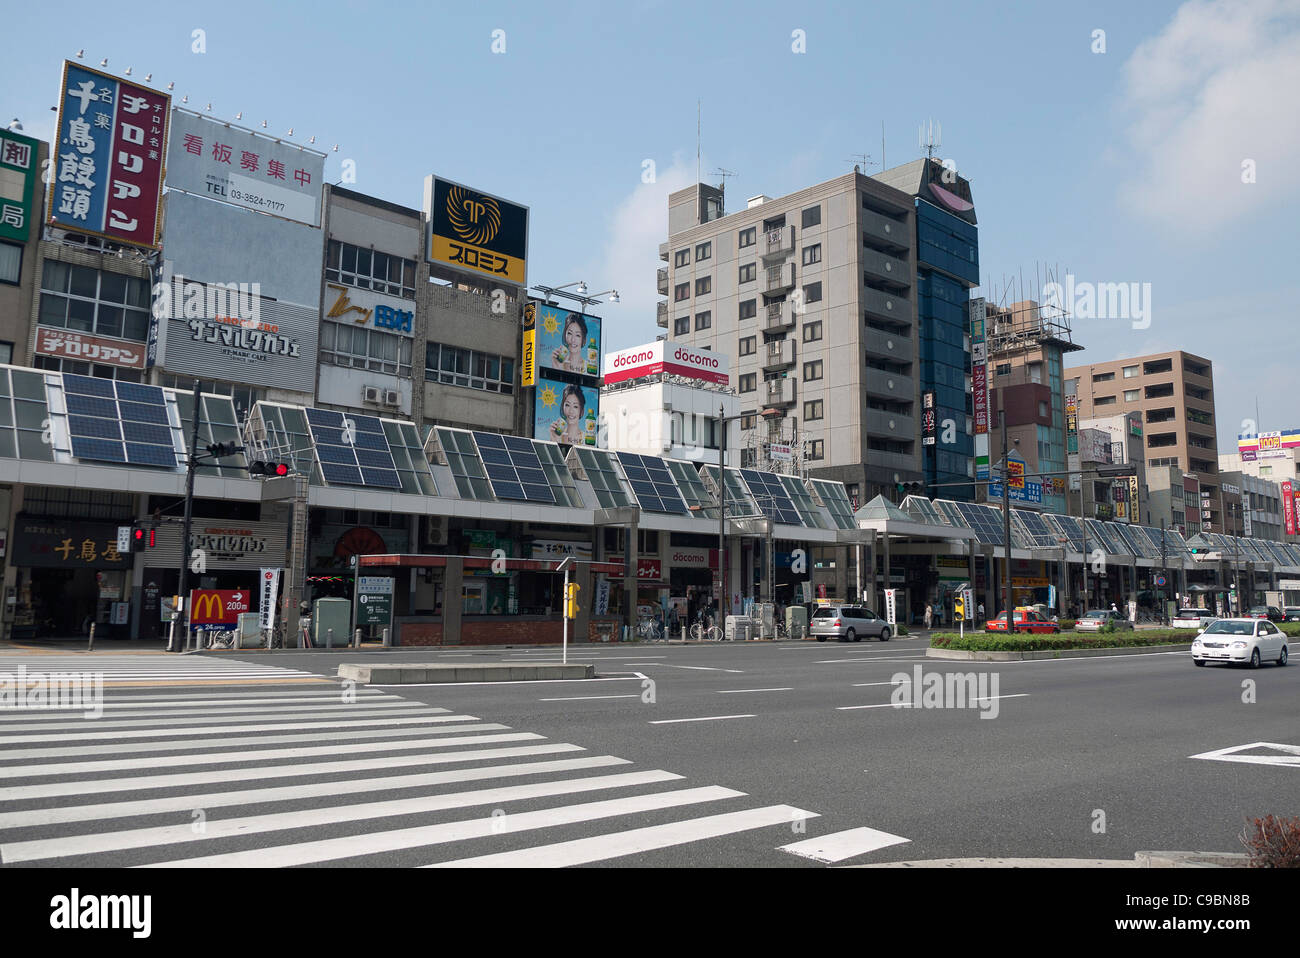 Japan, Honshu, Tokyo, Sugamo, the roof of arcade covering sidewalk used for solar electric and water heating panels. Stock Photo